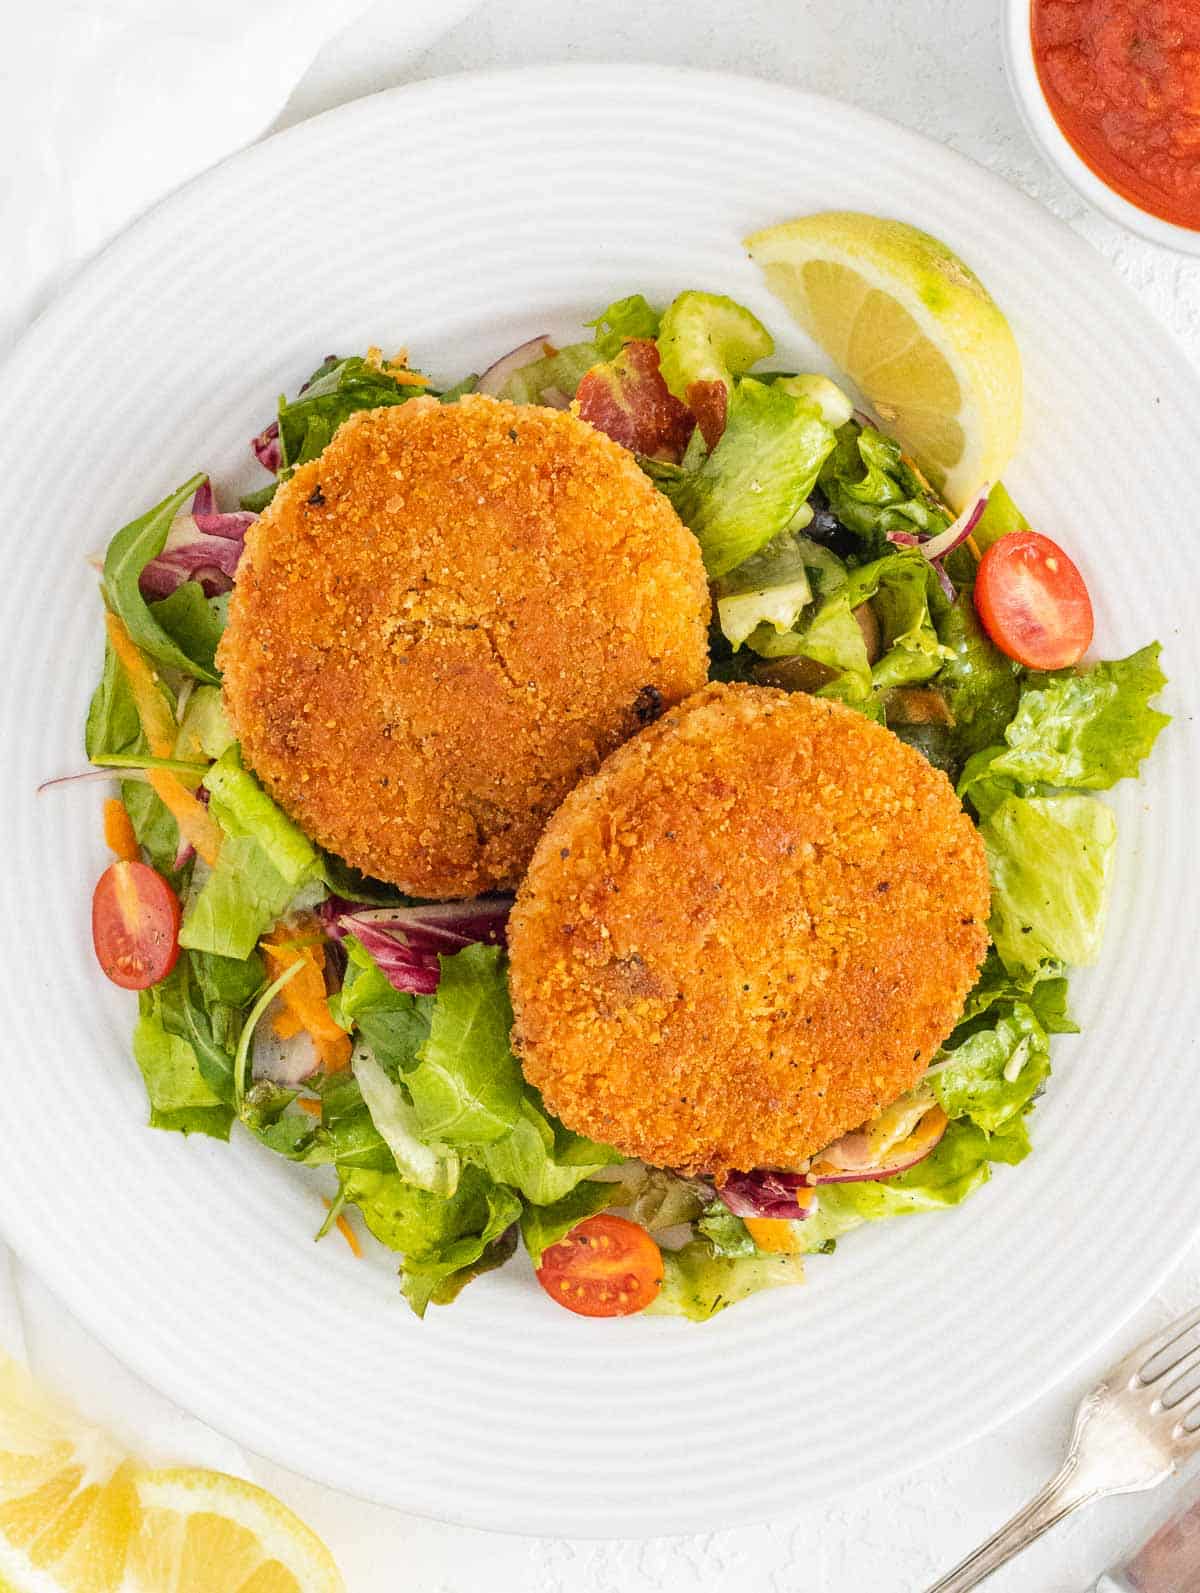 risotto cakes served on a side salad